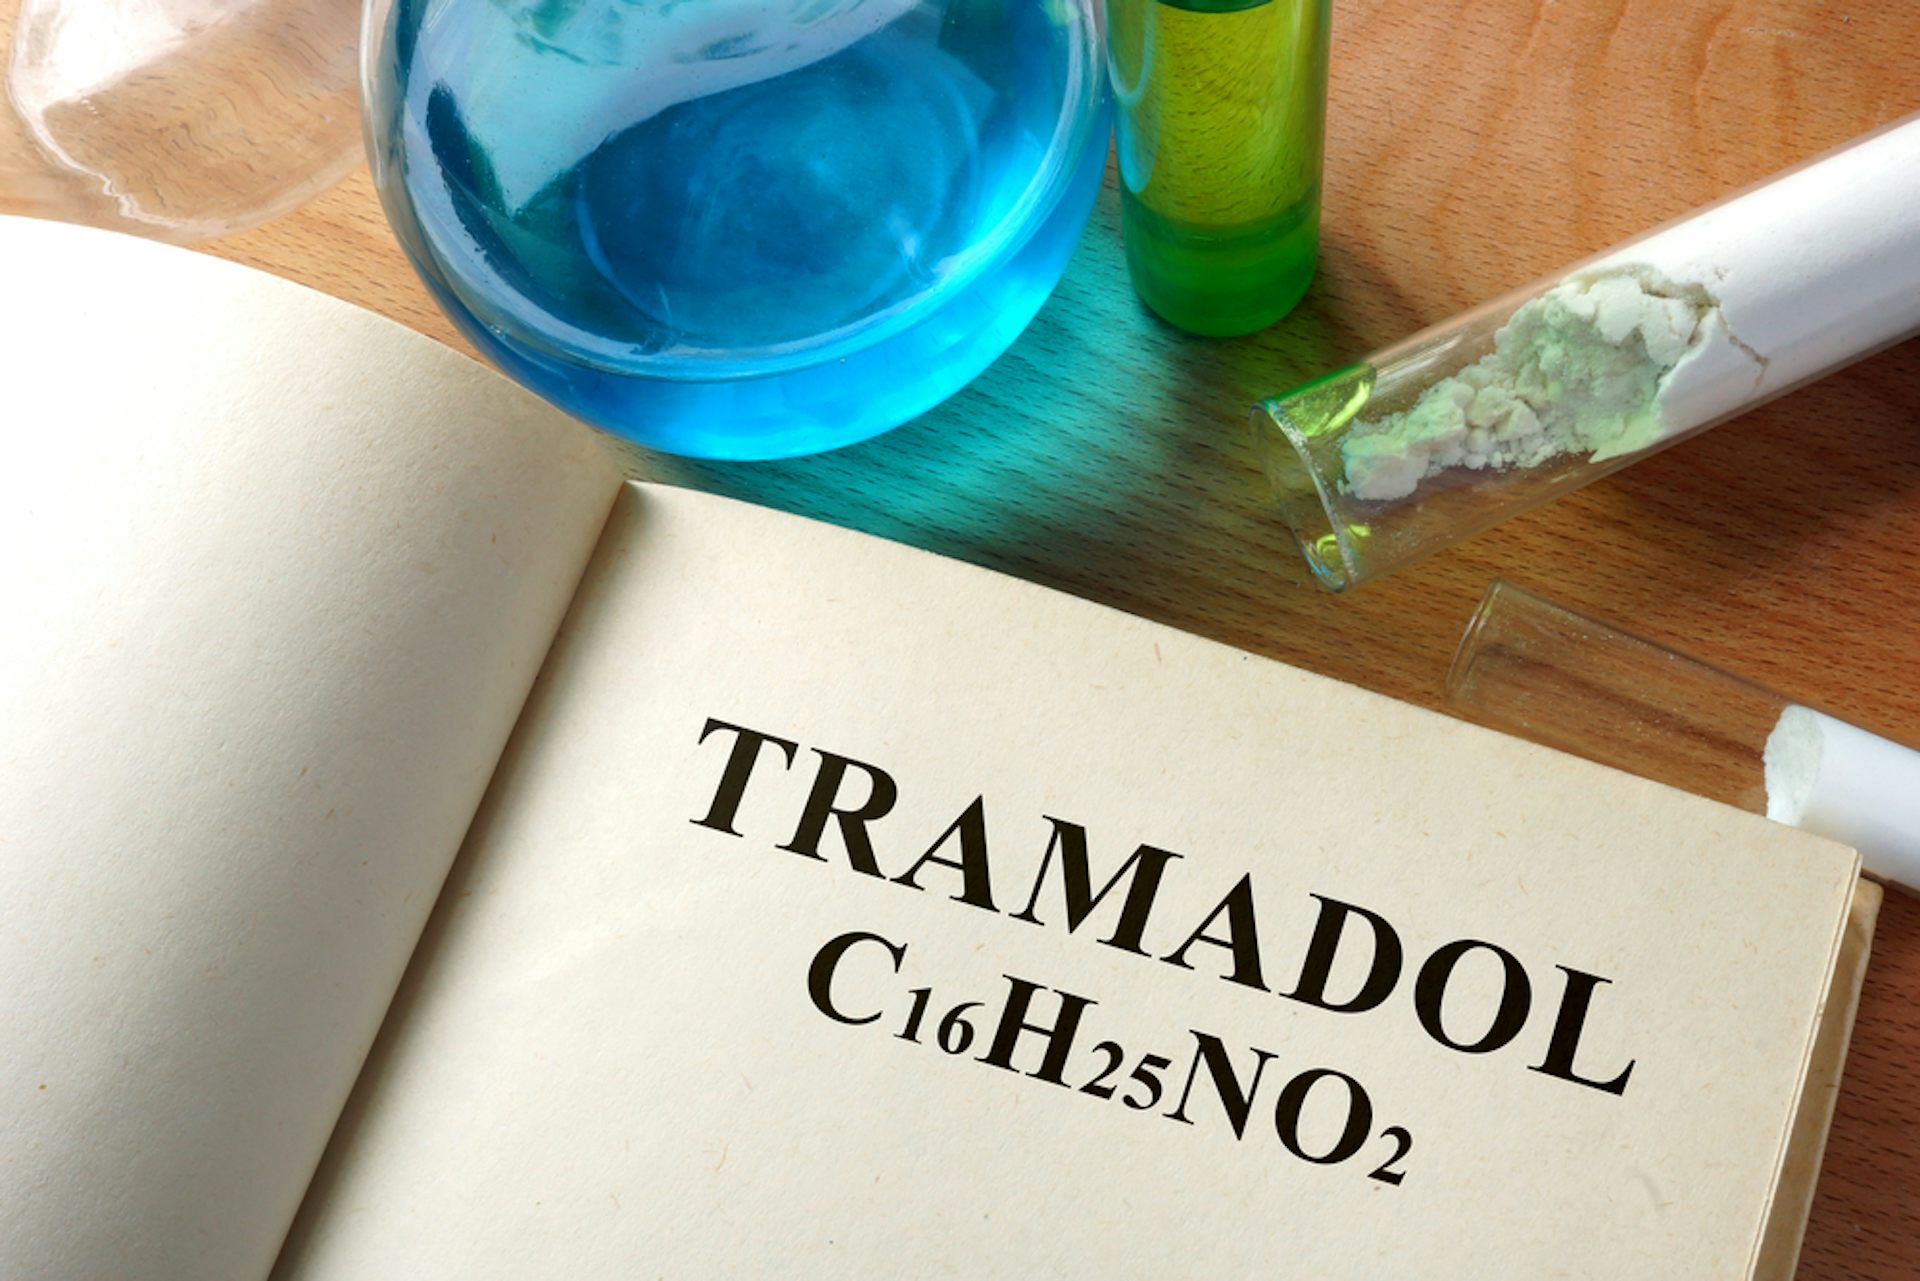 How long is tramadol in my system